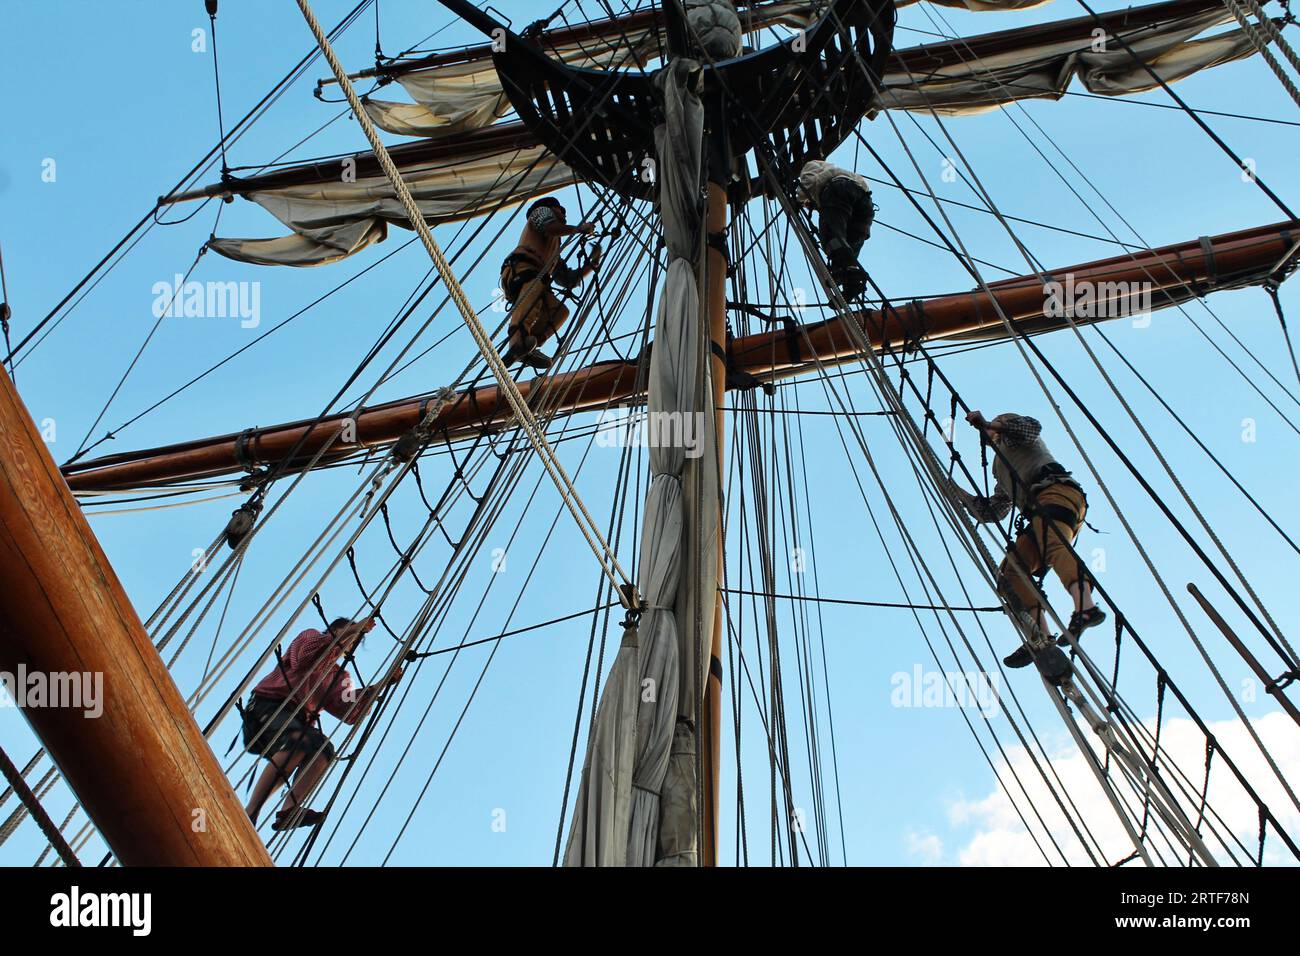 Sailors are seen in silhouette against the blue sky as they climb the rigging of a tall ship to unfurl the sails to catch the rising wind Stock Photo